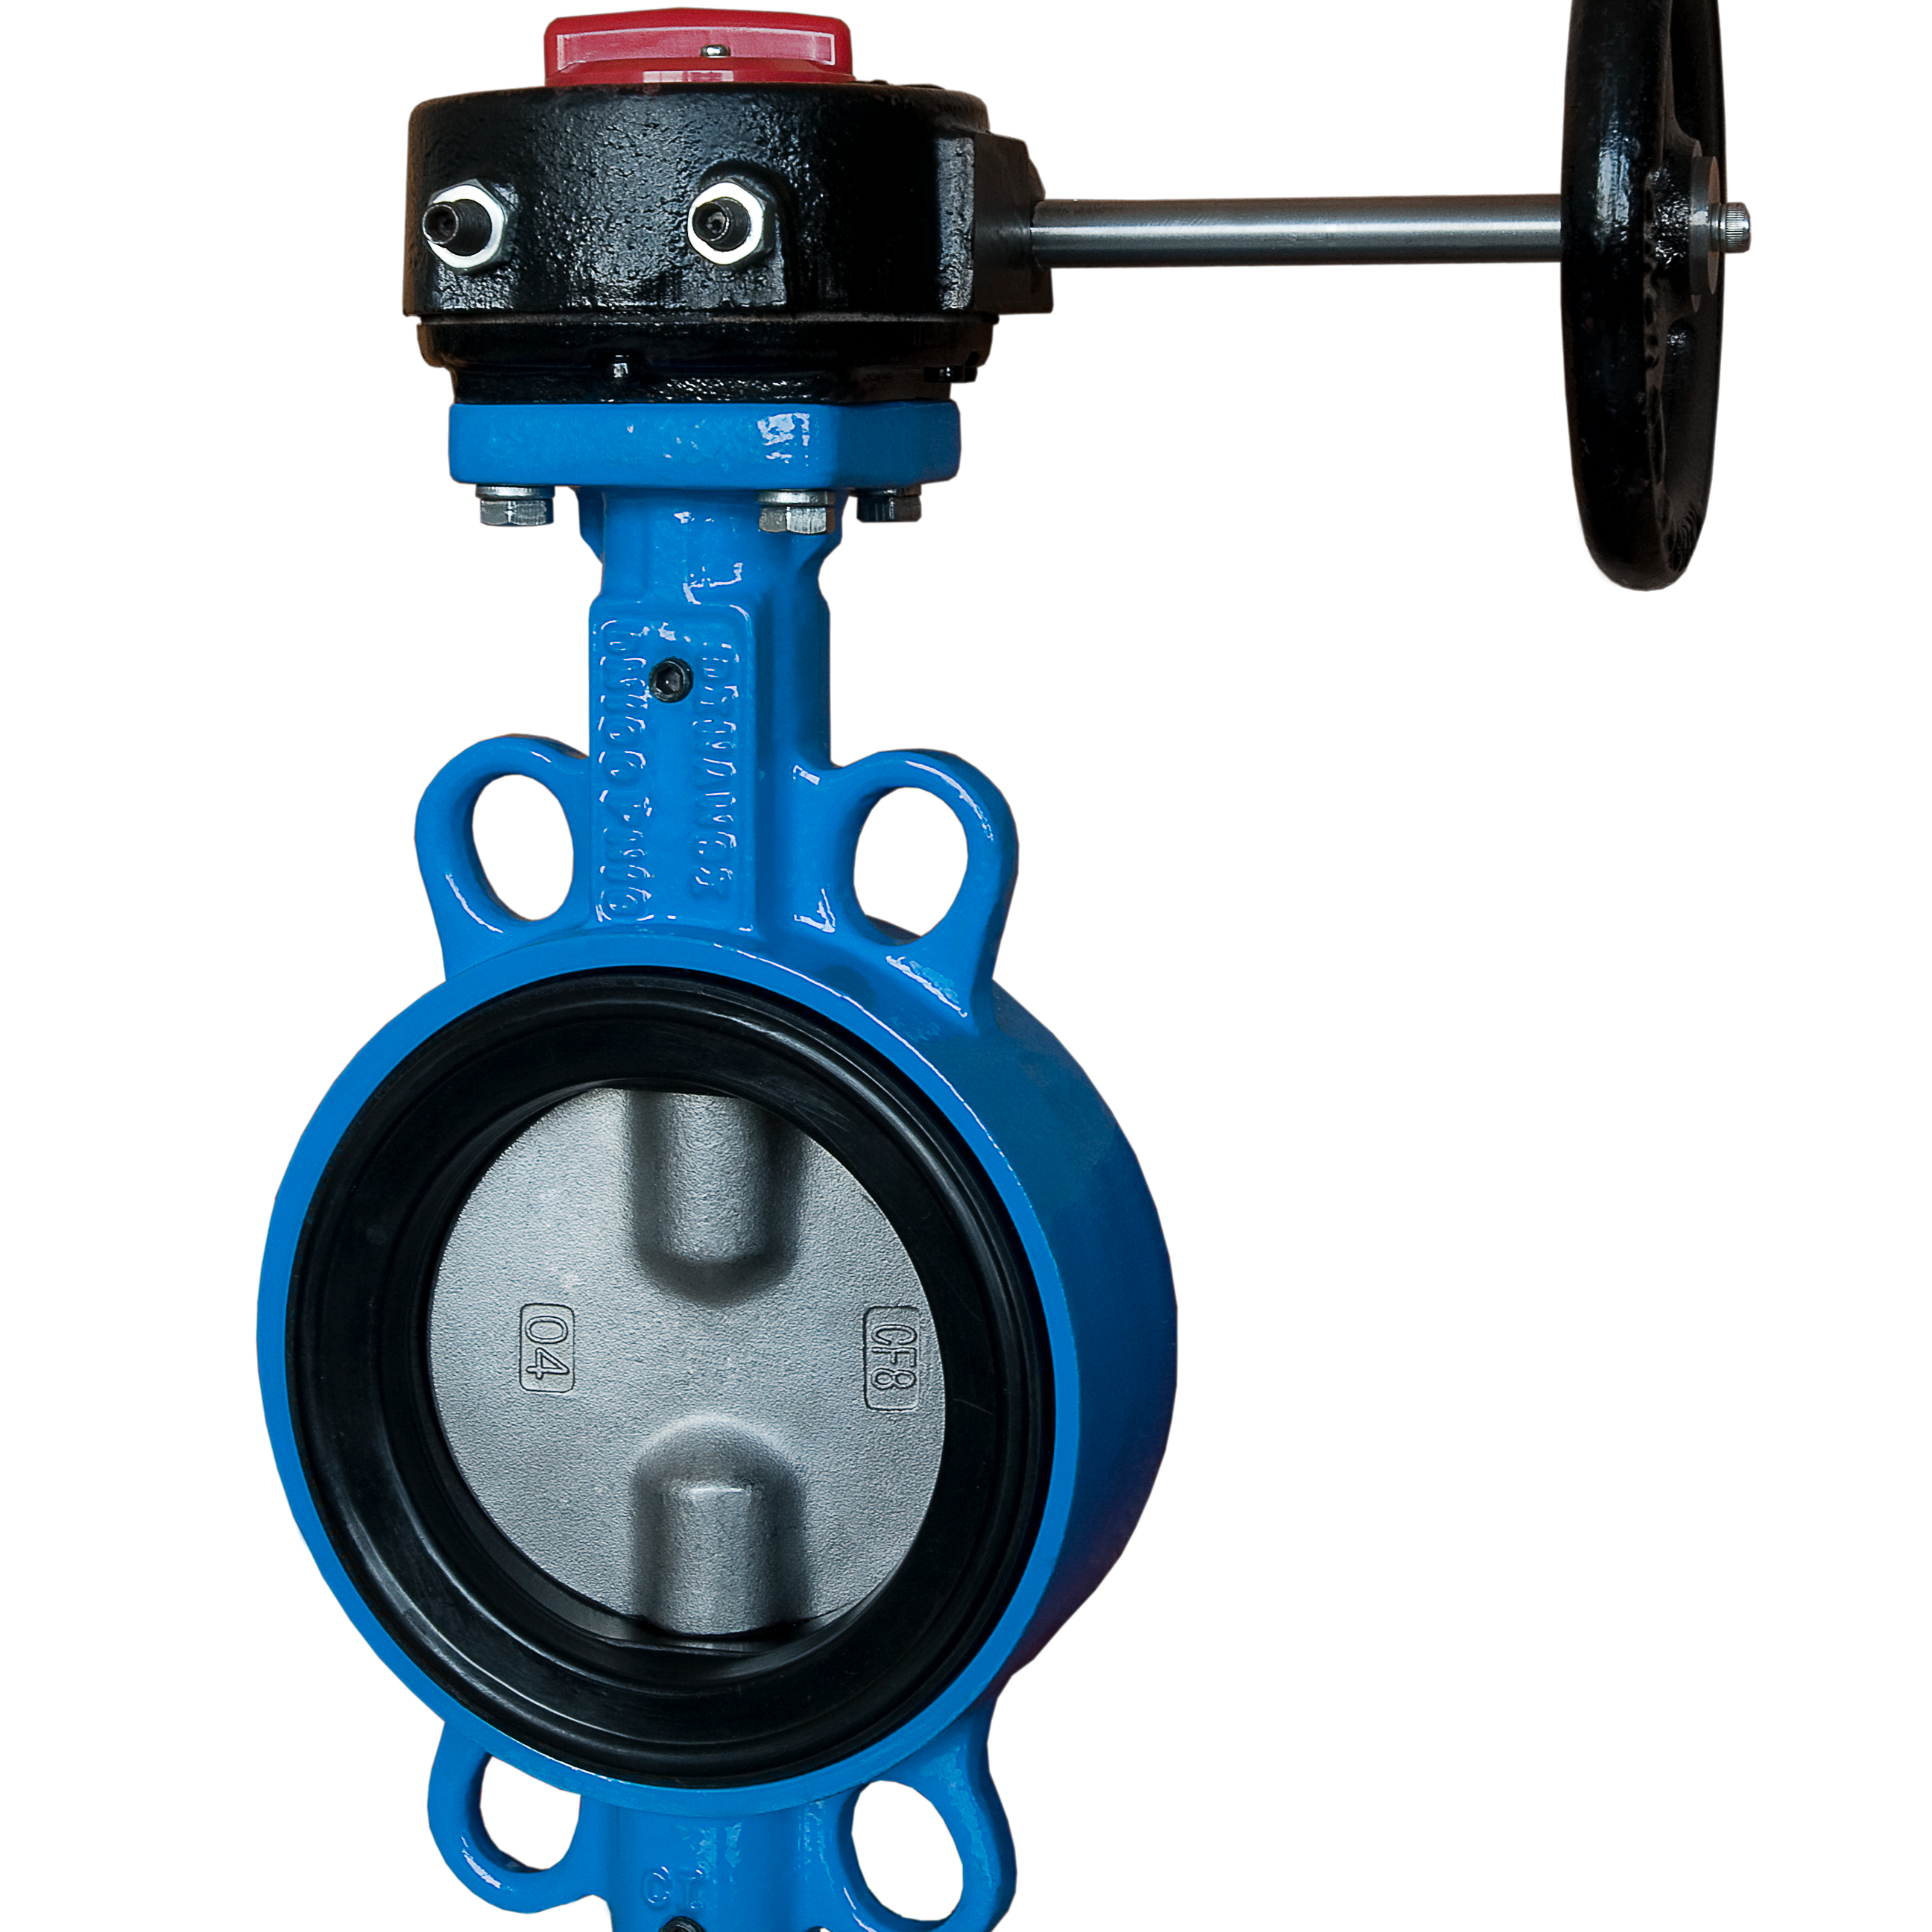 Butterfly Valve Wafer Type Ductile Iron Worm Gearbox EPDM Seat Ductile Cast Iron DI CI PN10 PN16 Valve